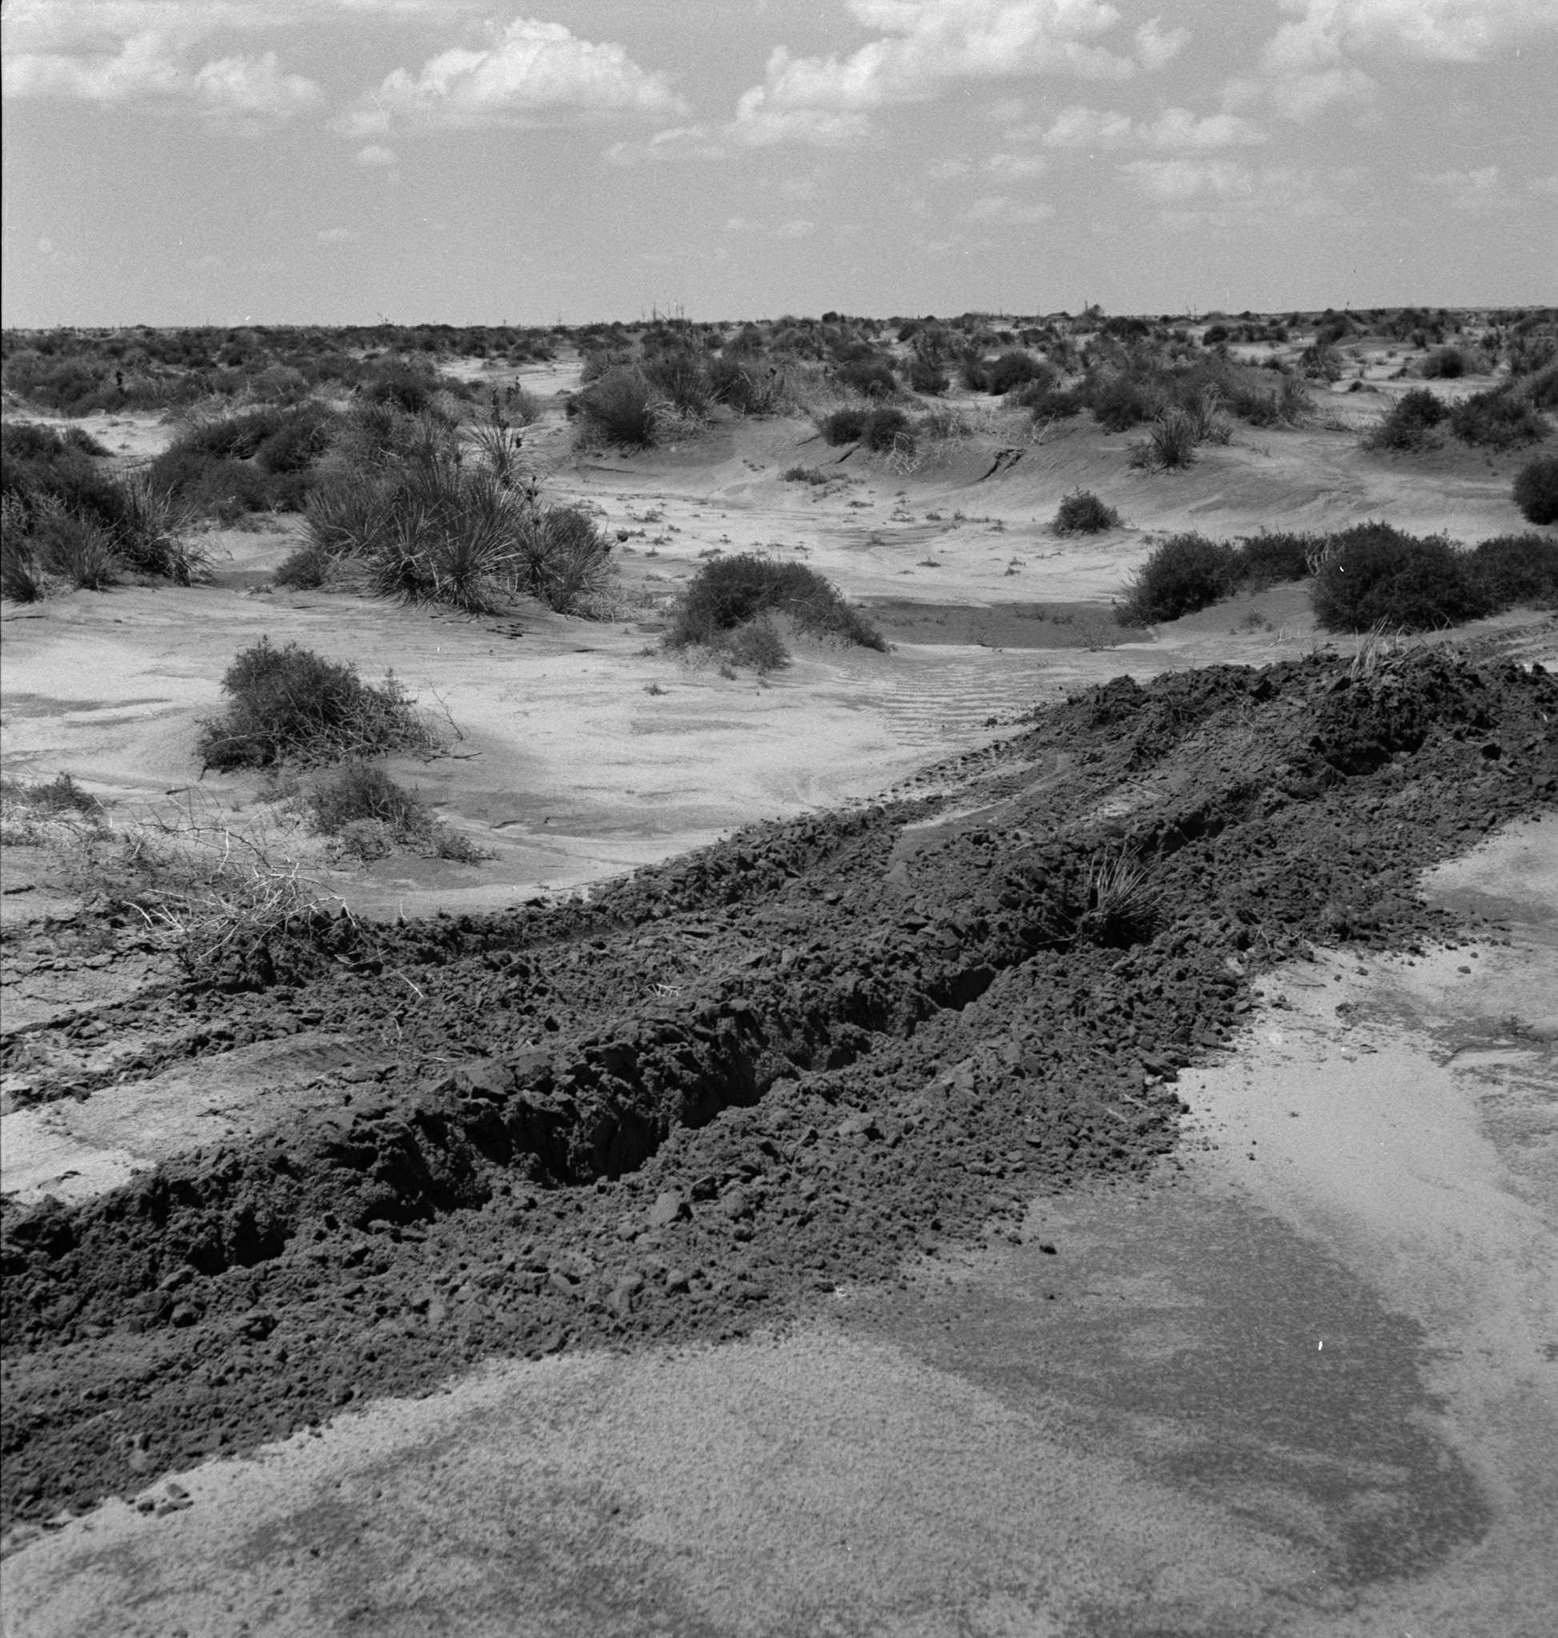 Leveling hummocks in the dust bowl. Coldwater District, thirty miles north of Dalhart, Texas, 1930s